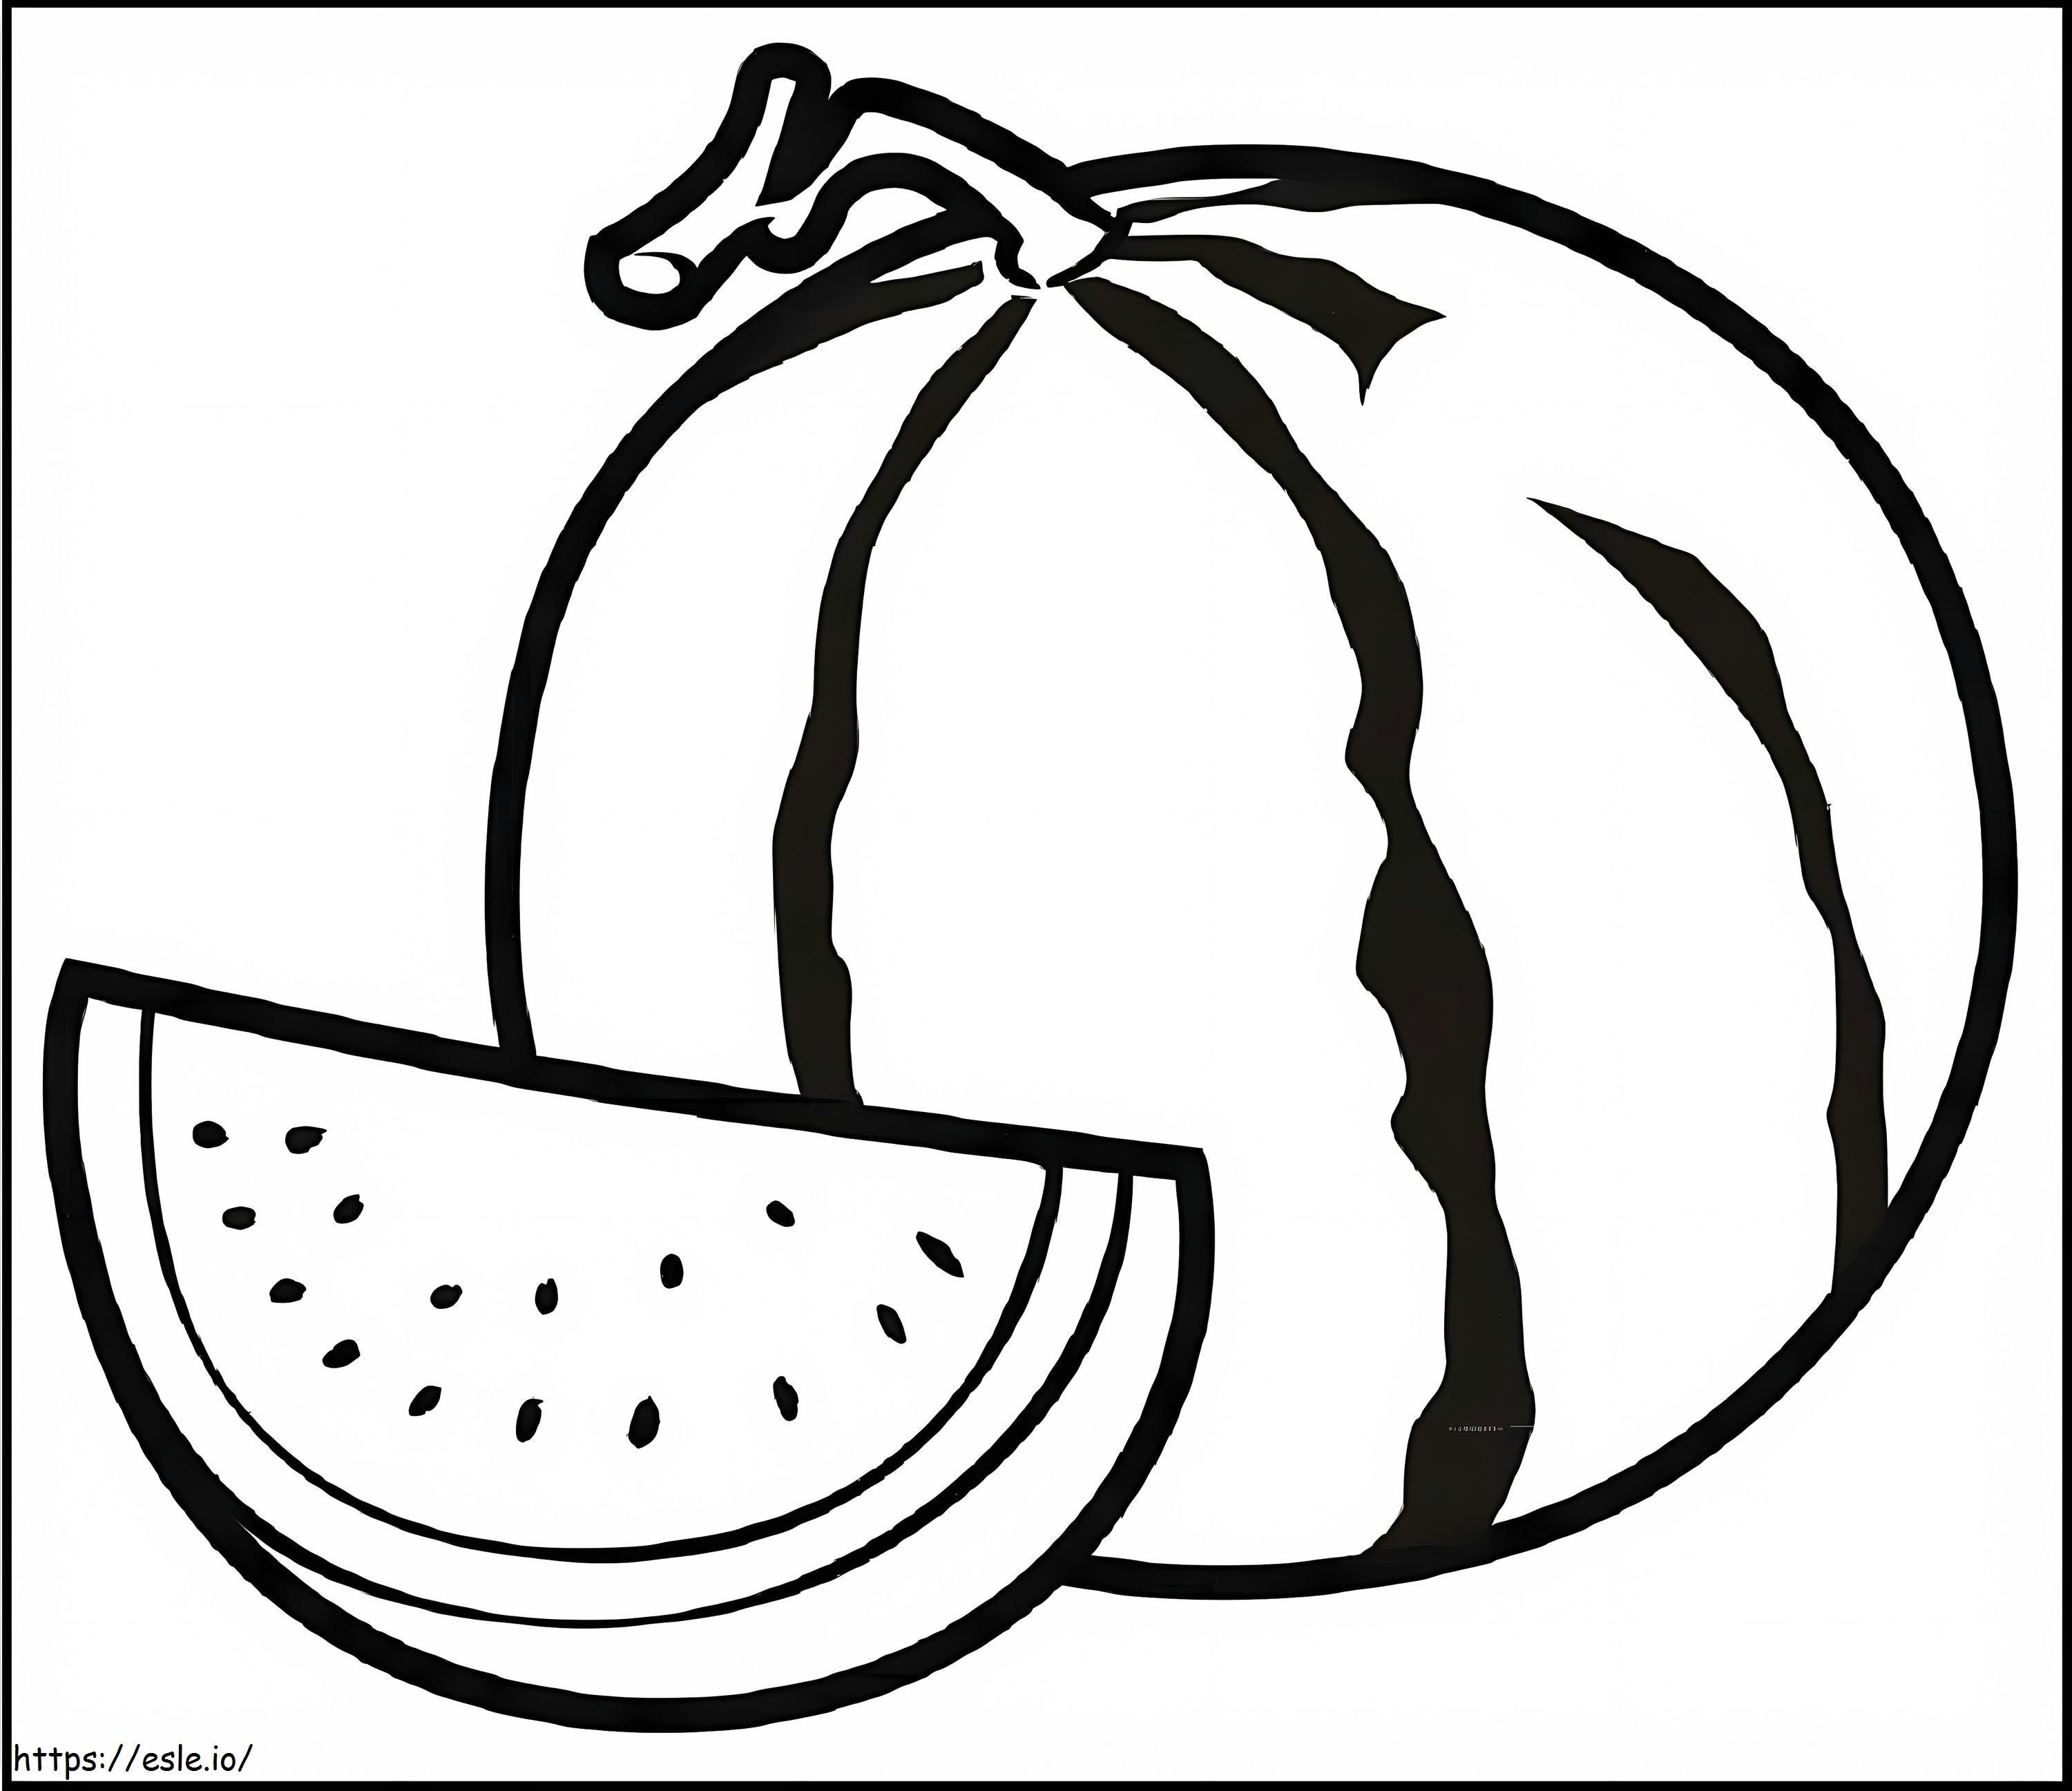 Basic Watermelon And Watermelon Slice coloring page